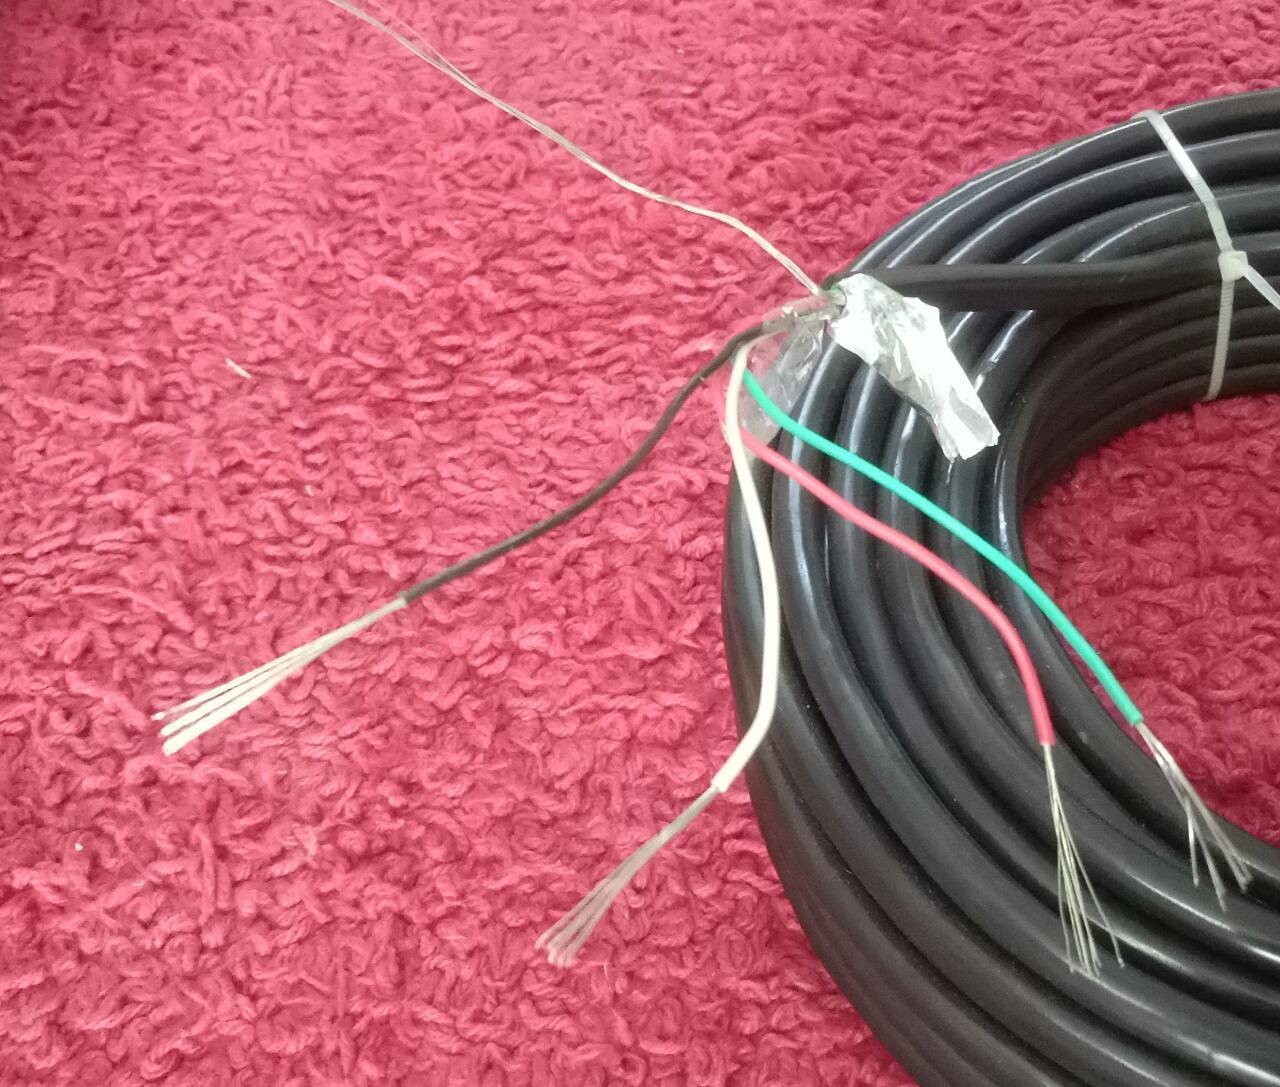 Load Cell Cable